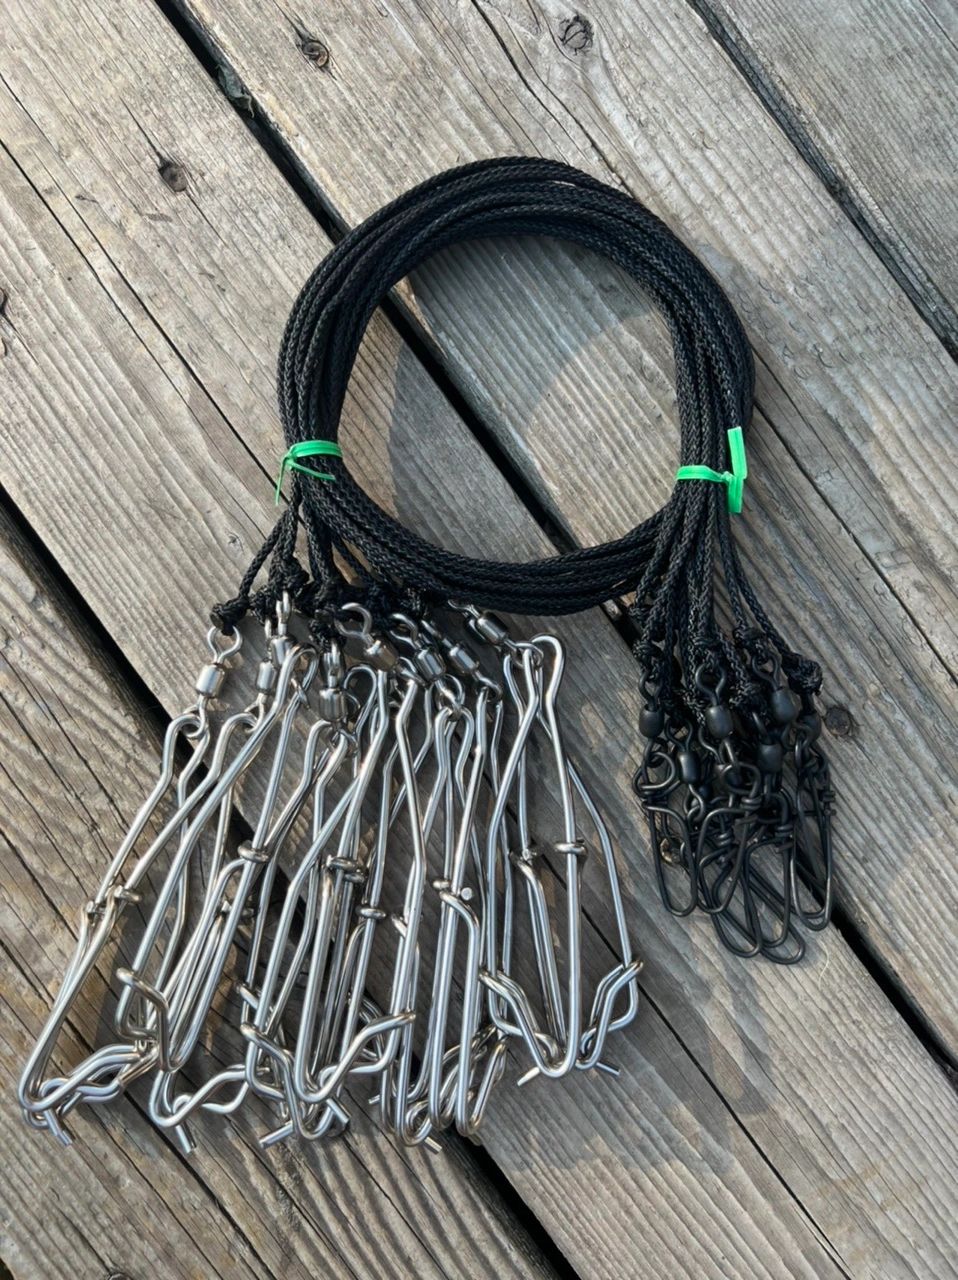 Stainless Longline Clip 5 – Florida Freedivers